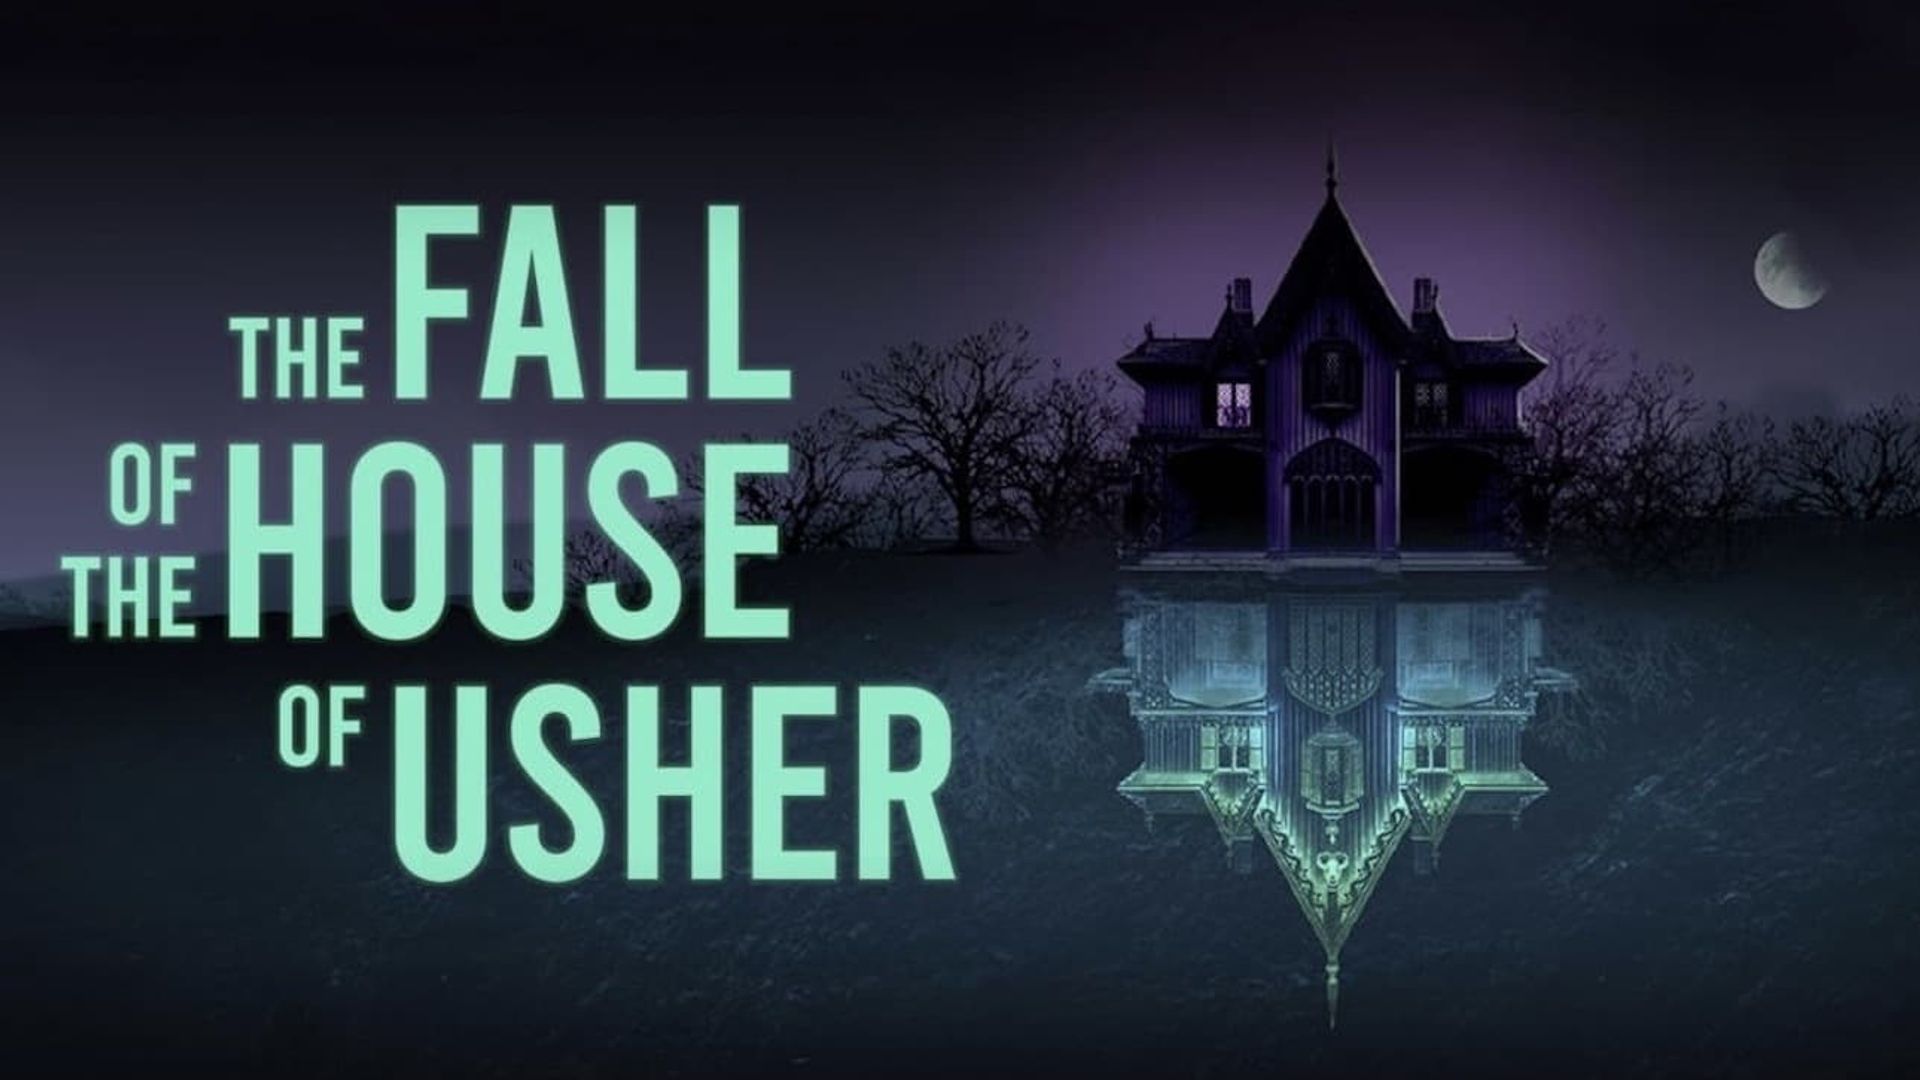 The Fall of the House of Usher background